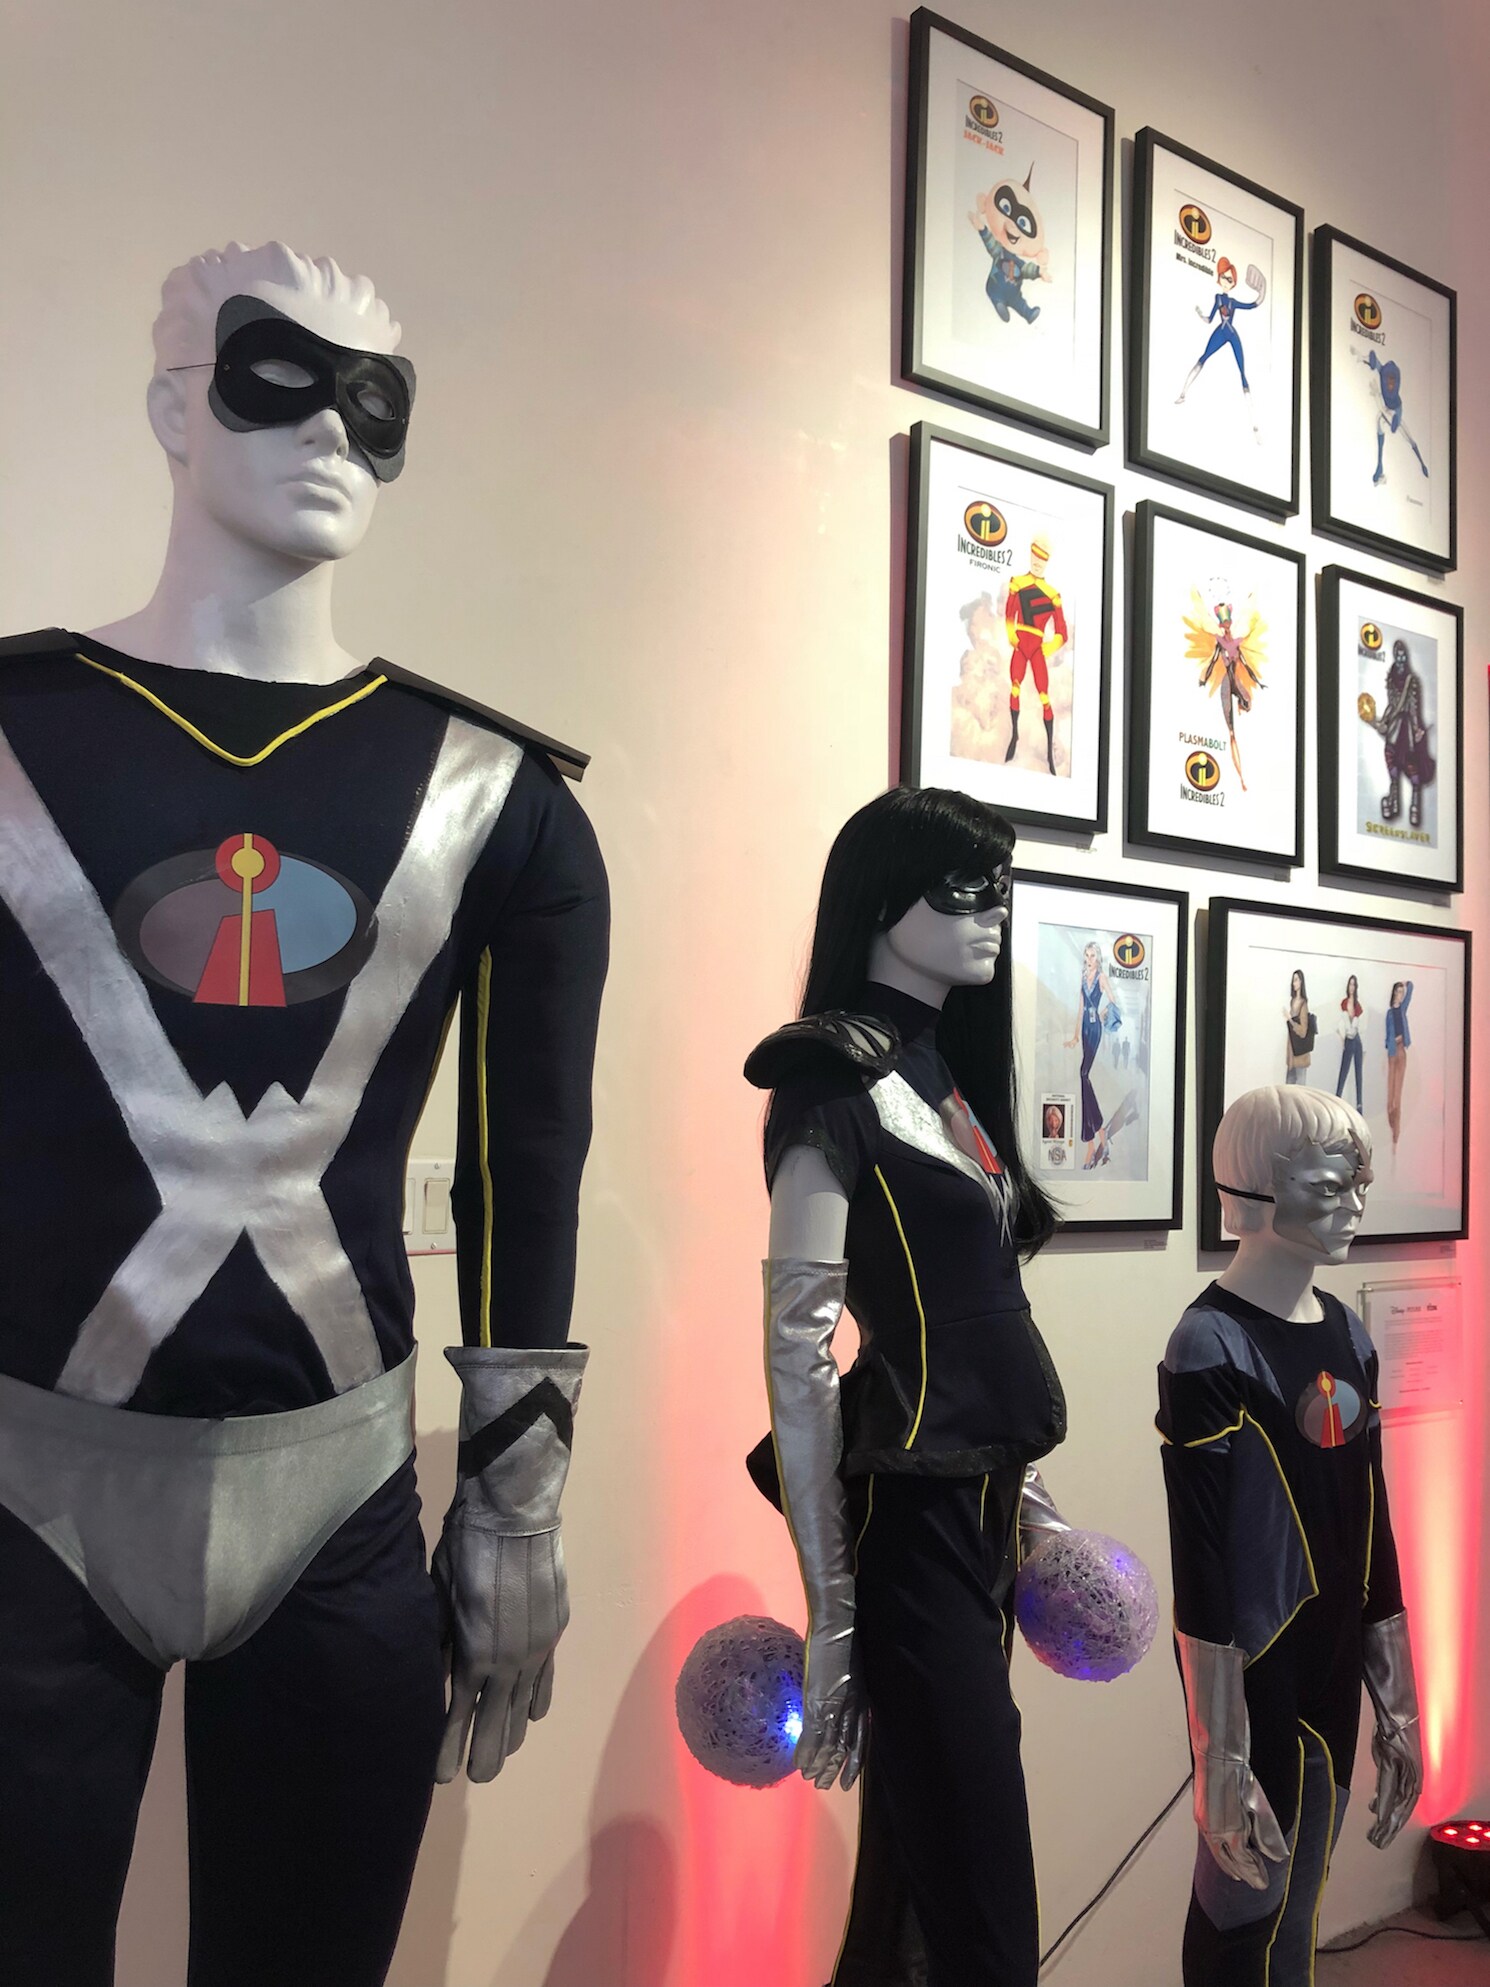 Incredibles 2 outfit design ideas from FIDM students 